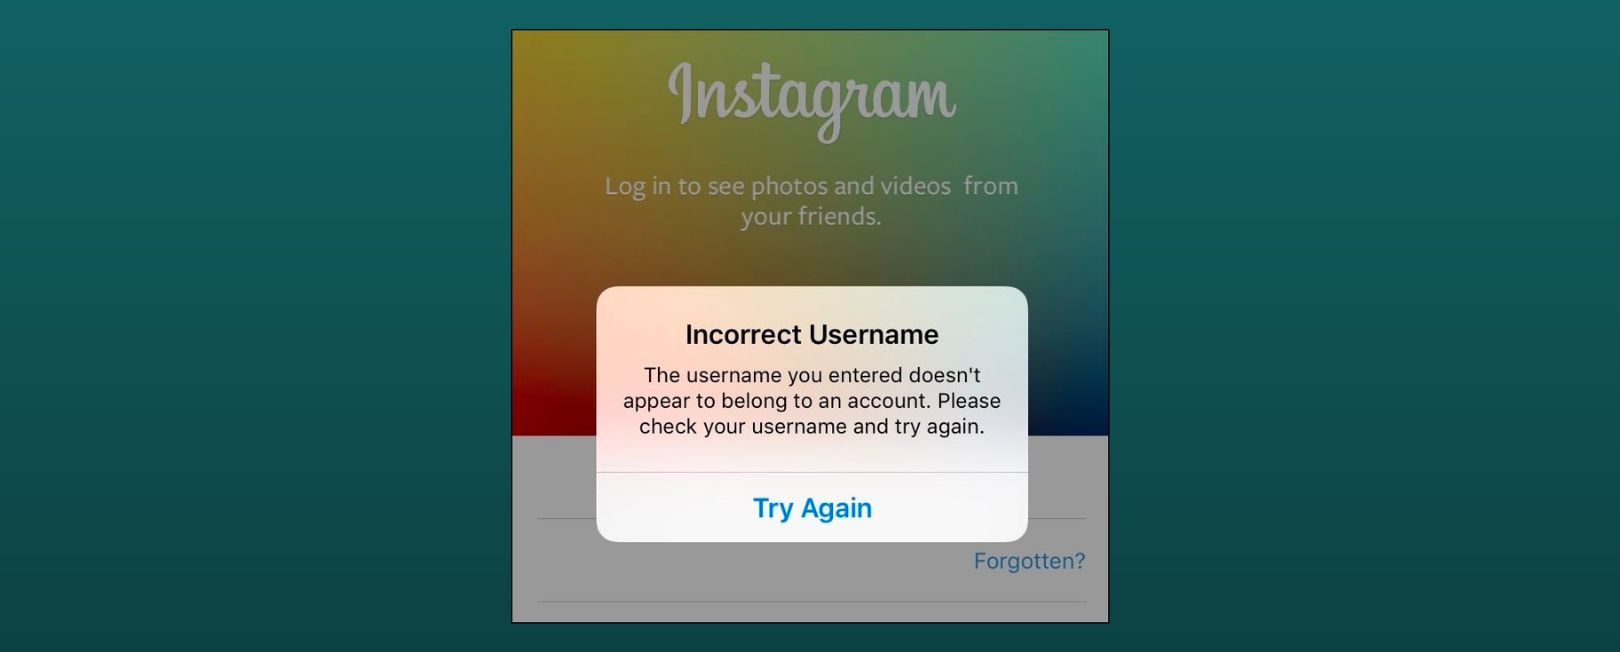 "The username you entered doesn't belong to an account" error on Instagram